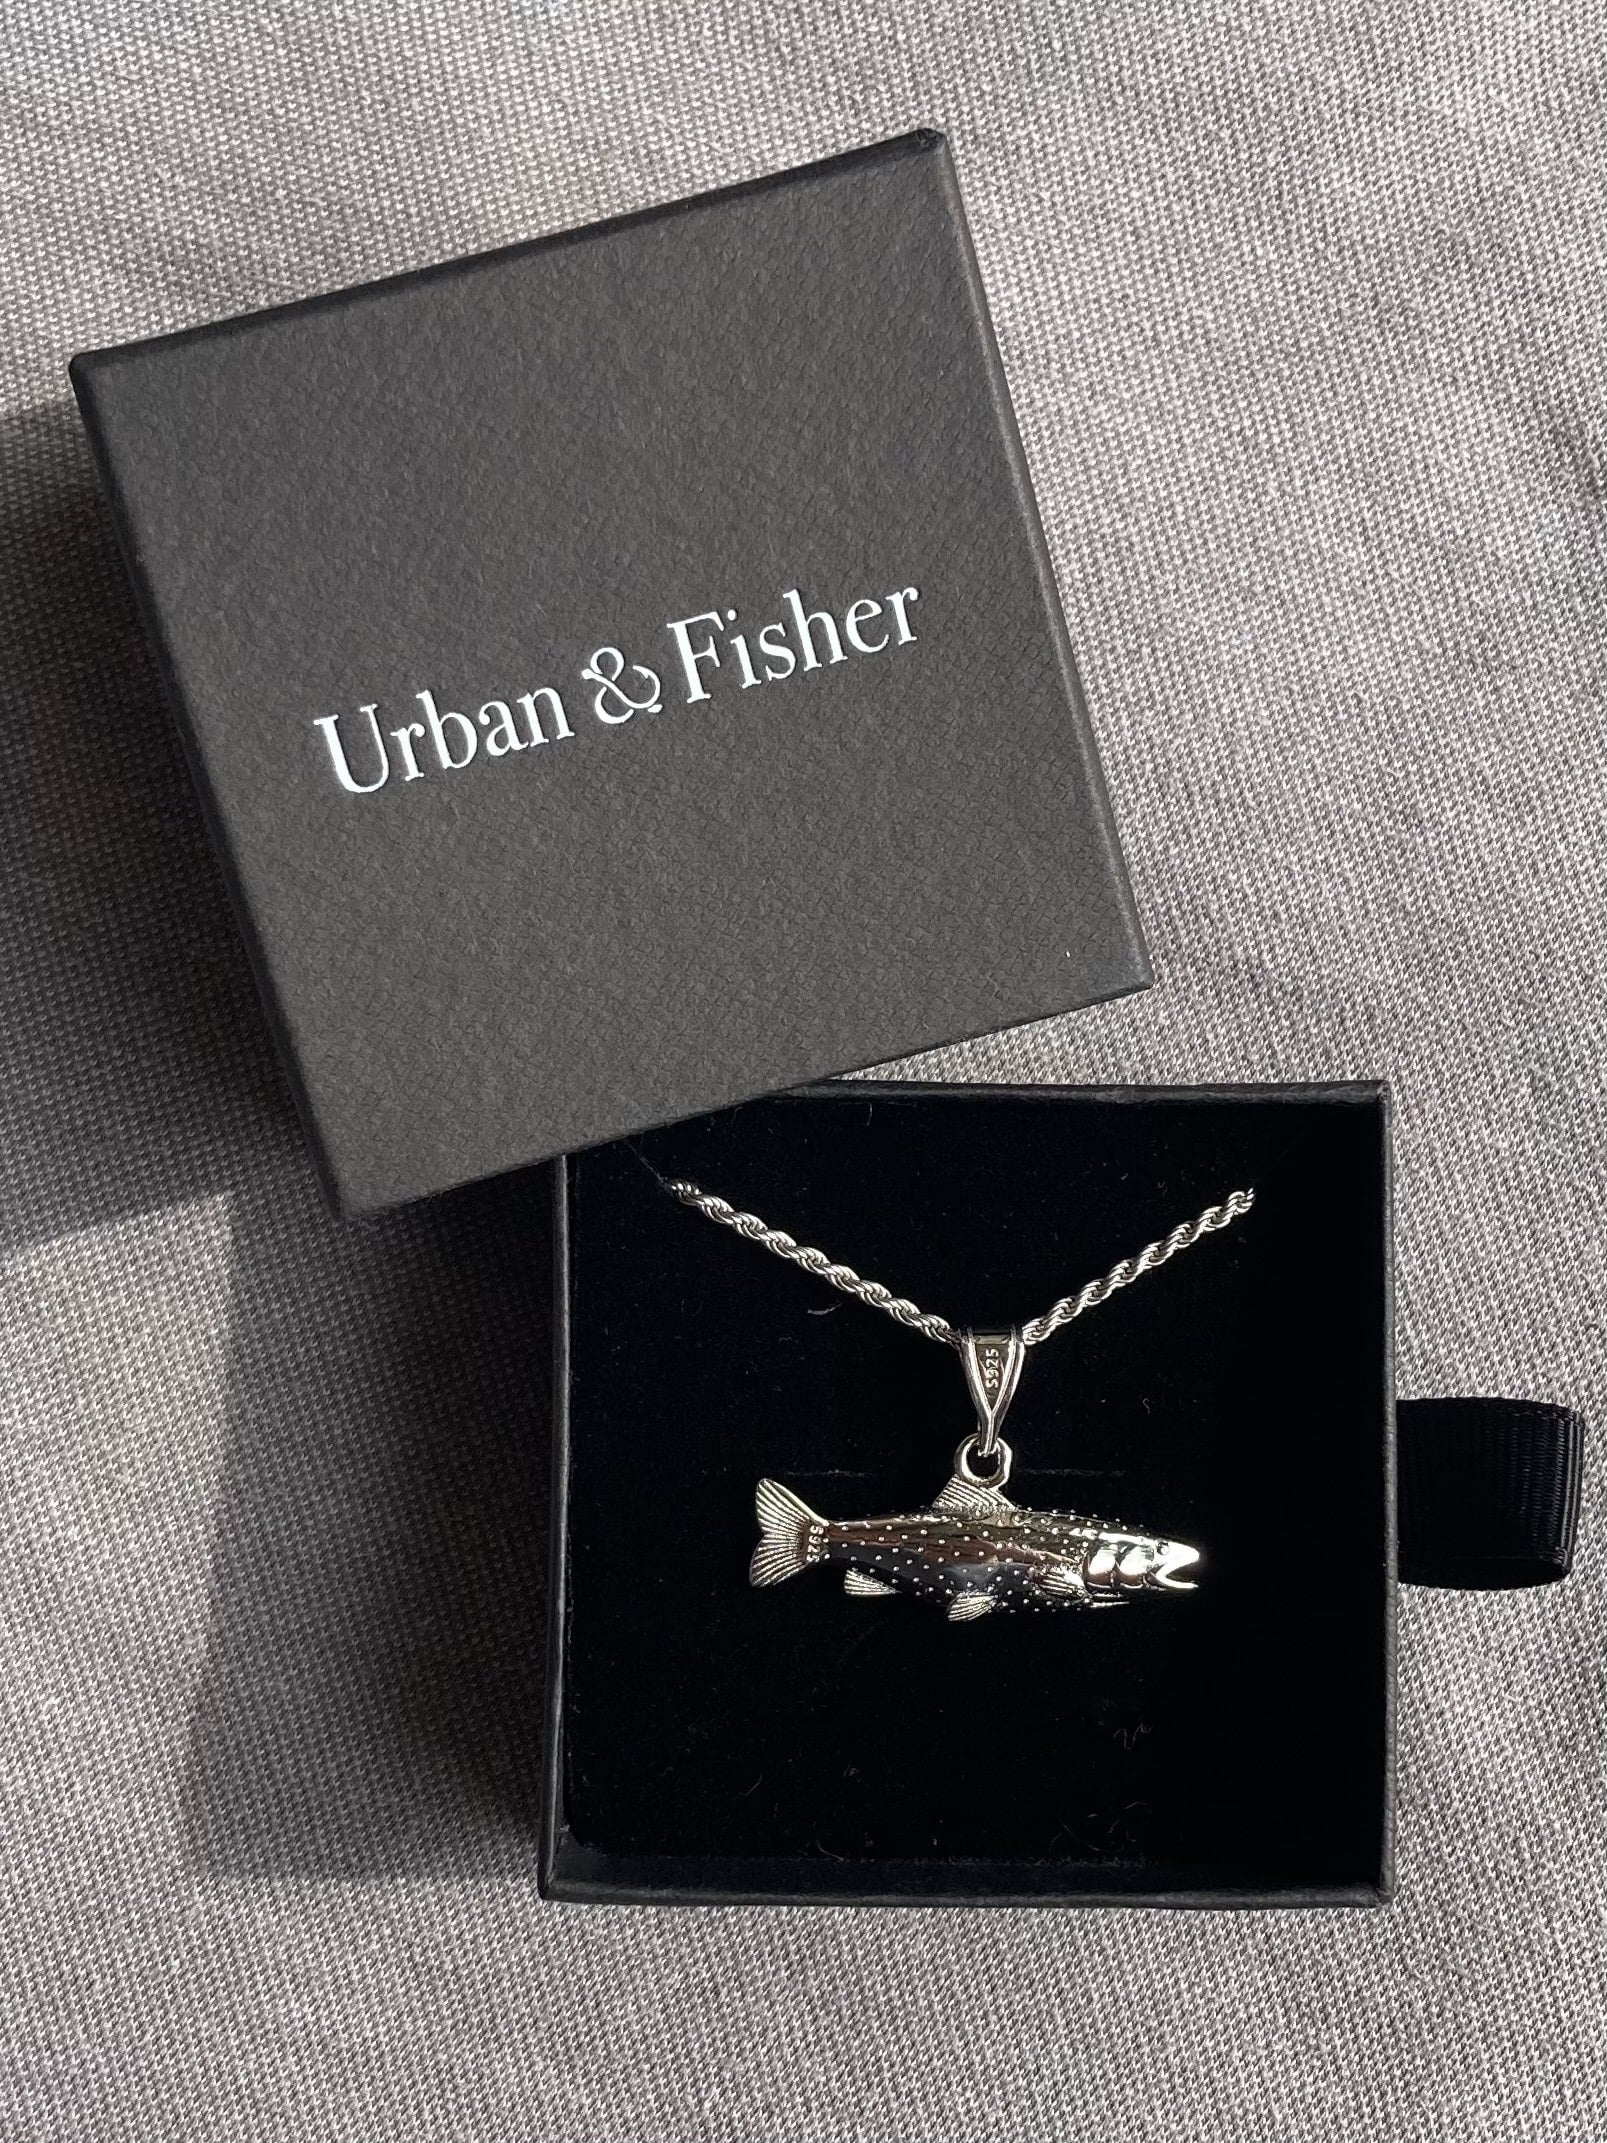 Fishing necklace trout – Urban & Fisher